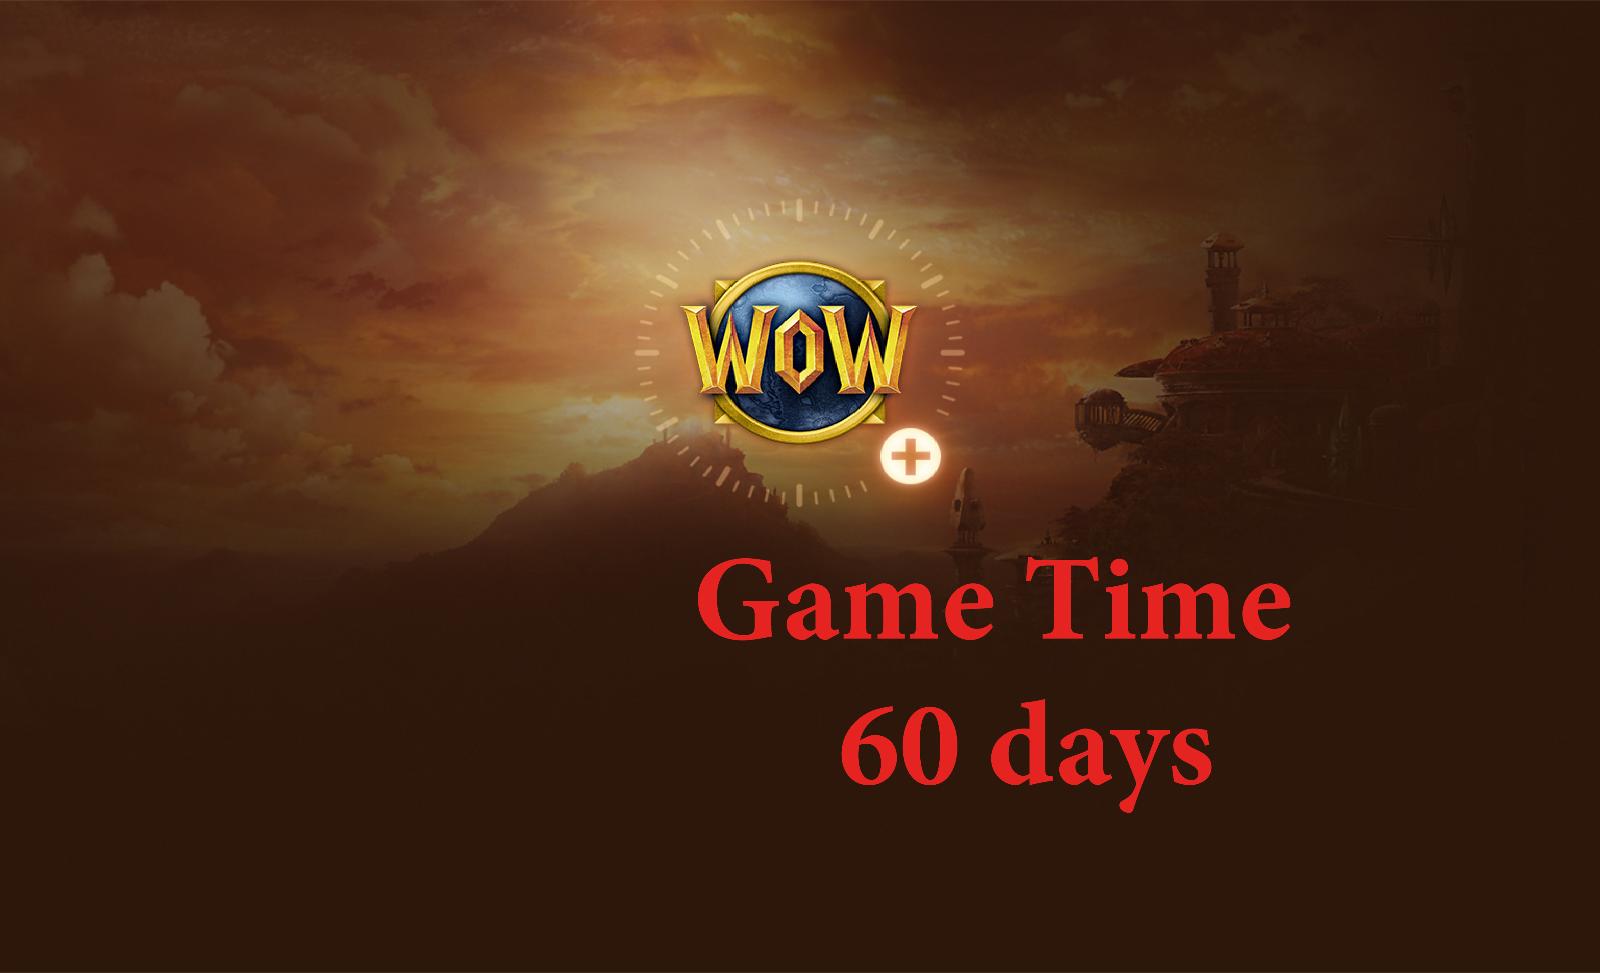 World of Warcraft Game Time 60 days - Hry